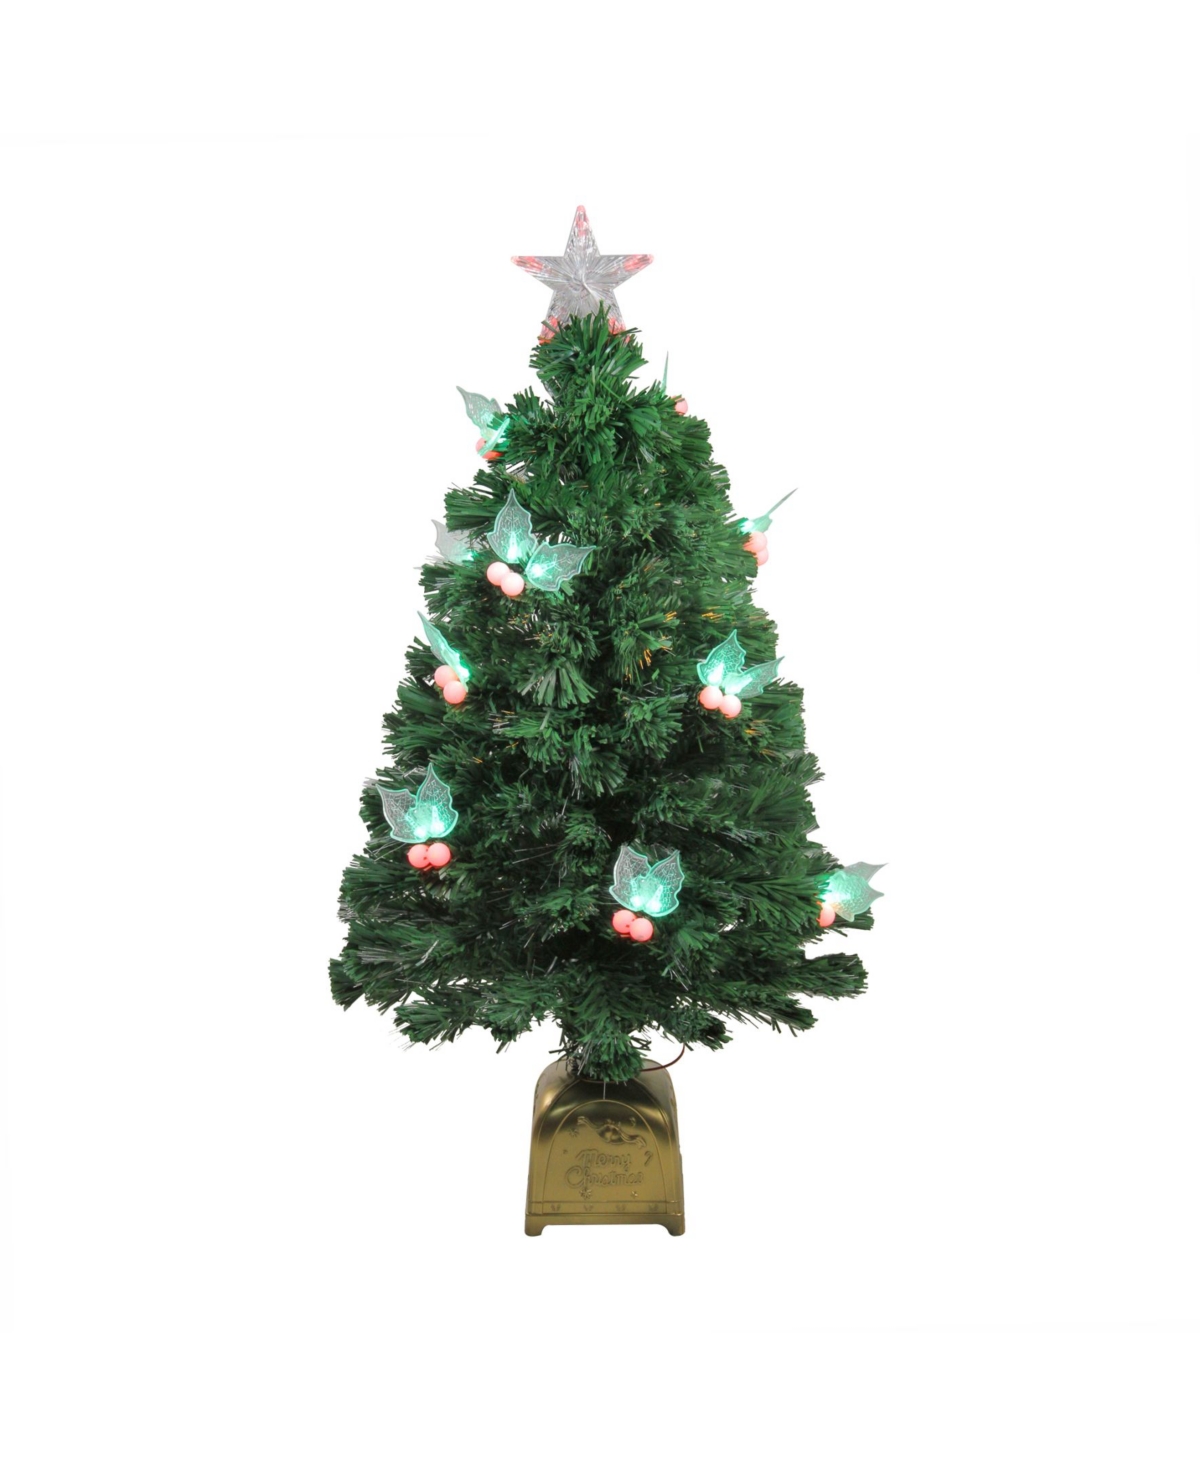 3' Pre-Lit Fiber Optic Christmas Tree with Led Holly Berries - Green